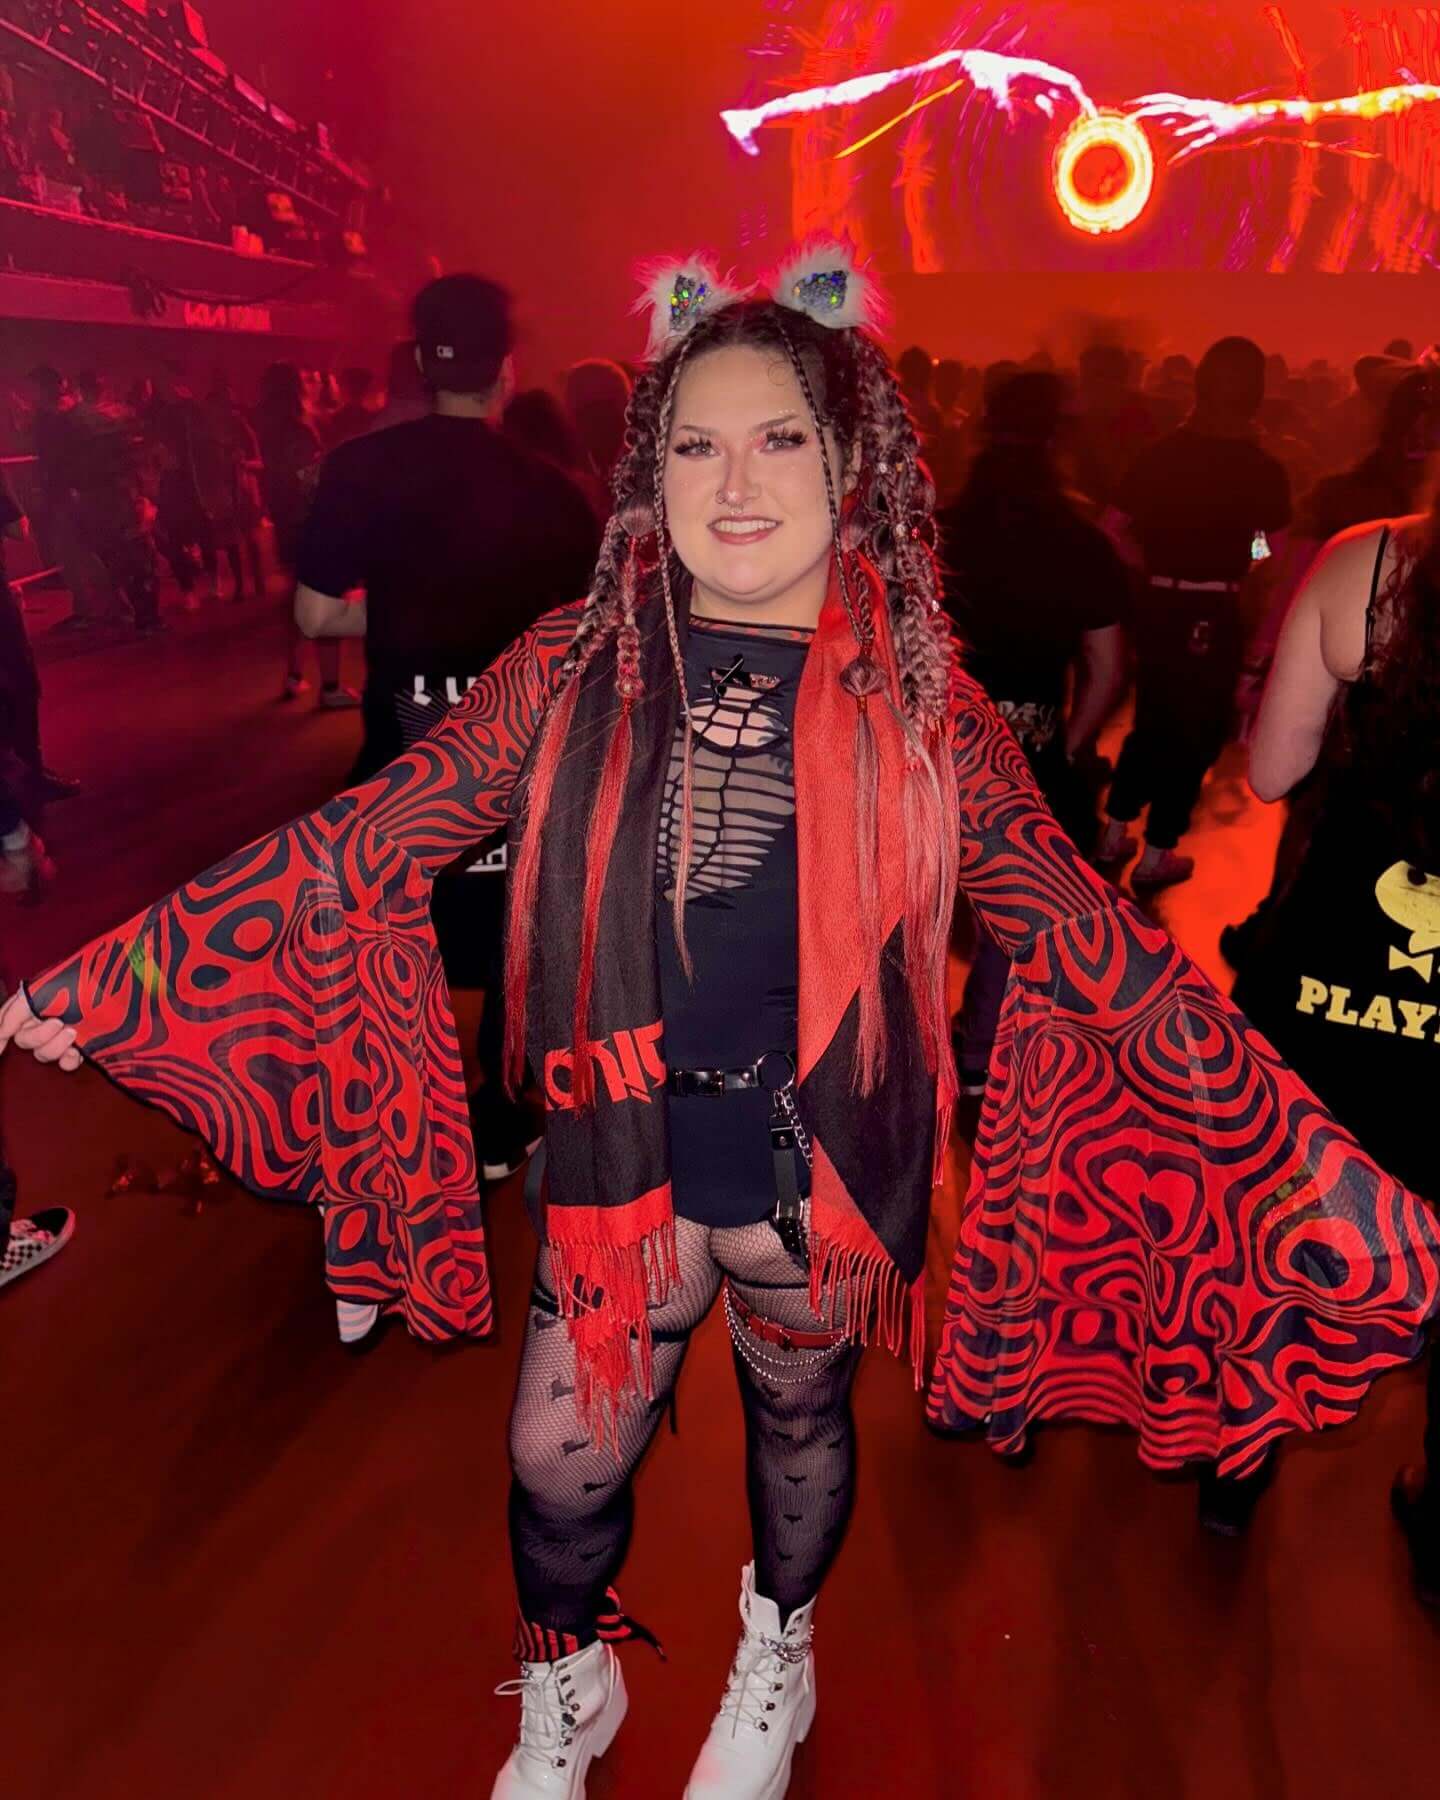 Vibrant rave enthusiast in a dynamic red and black patterned outfit, complete with layered shawls and playful accessories, celebrating at a festival